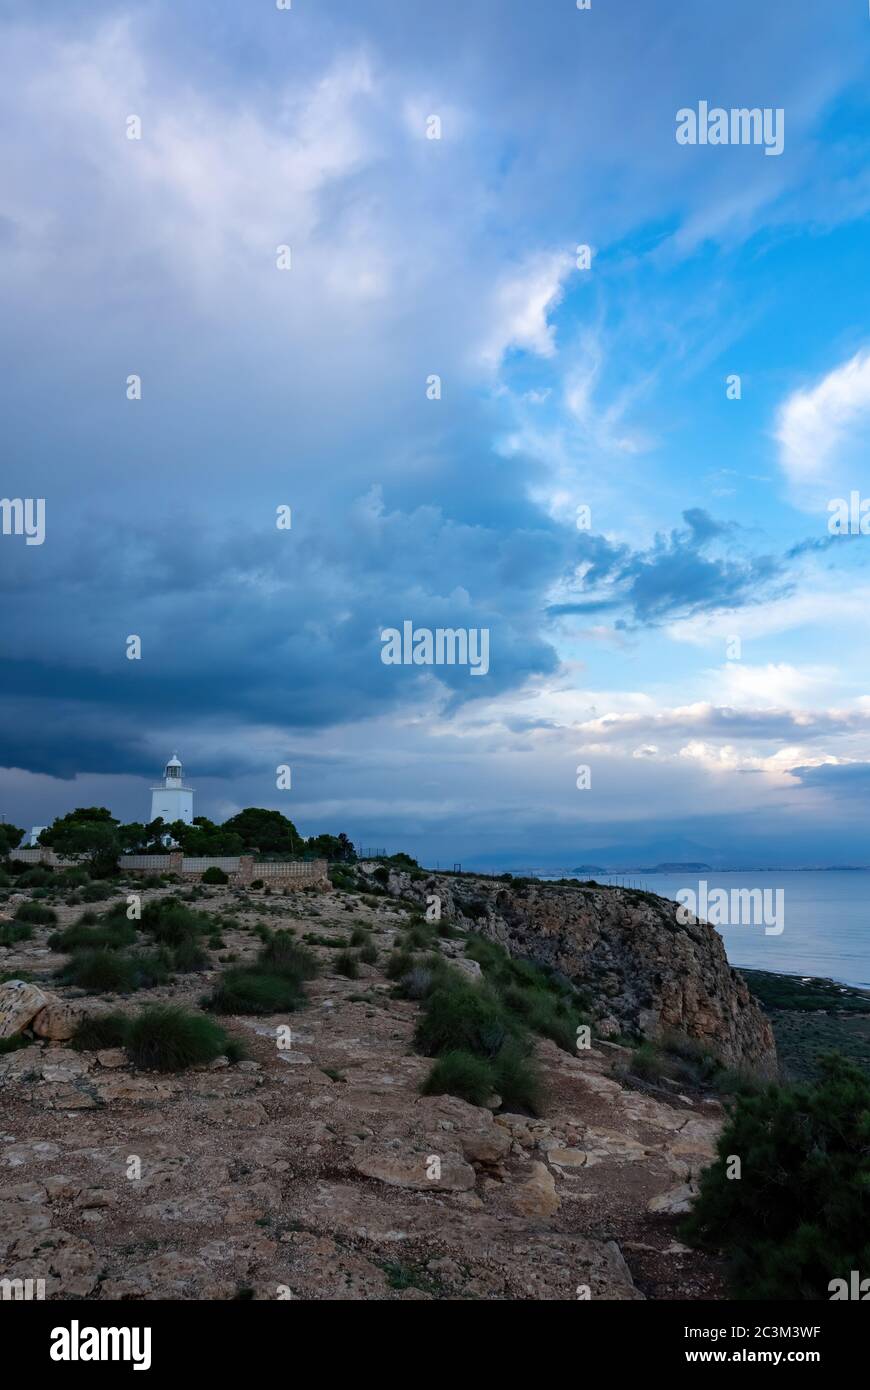 Lighthouse of Santa Pola built in 1858 near Alicante, Spain. Rainy clouds and sea view. Stock Photo